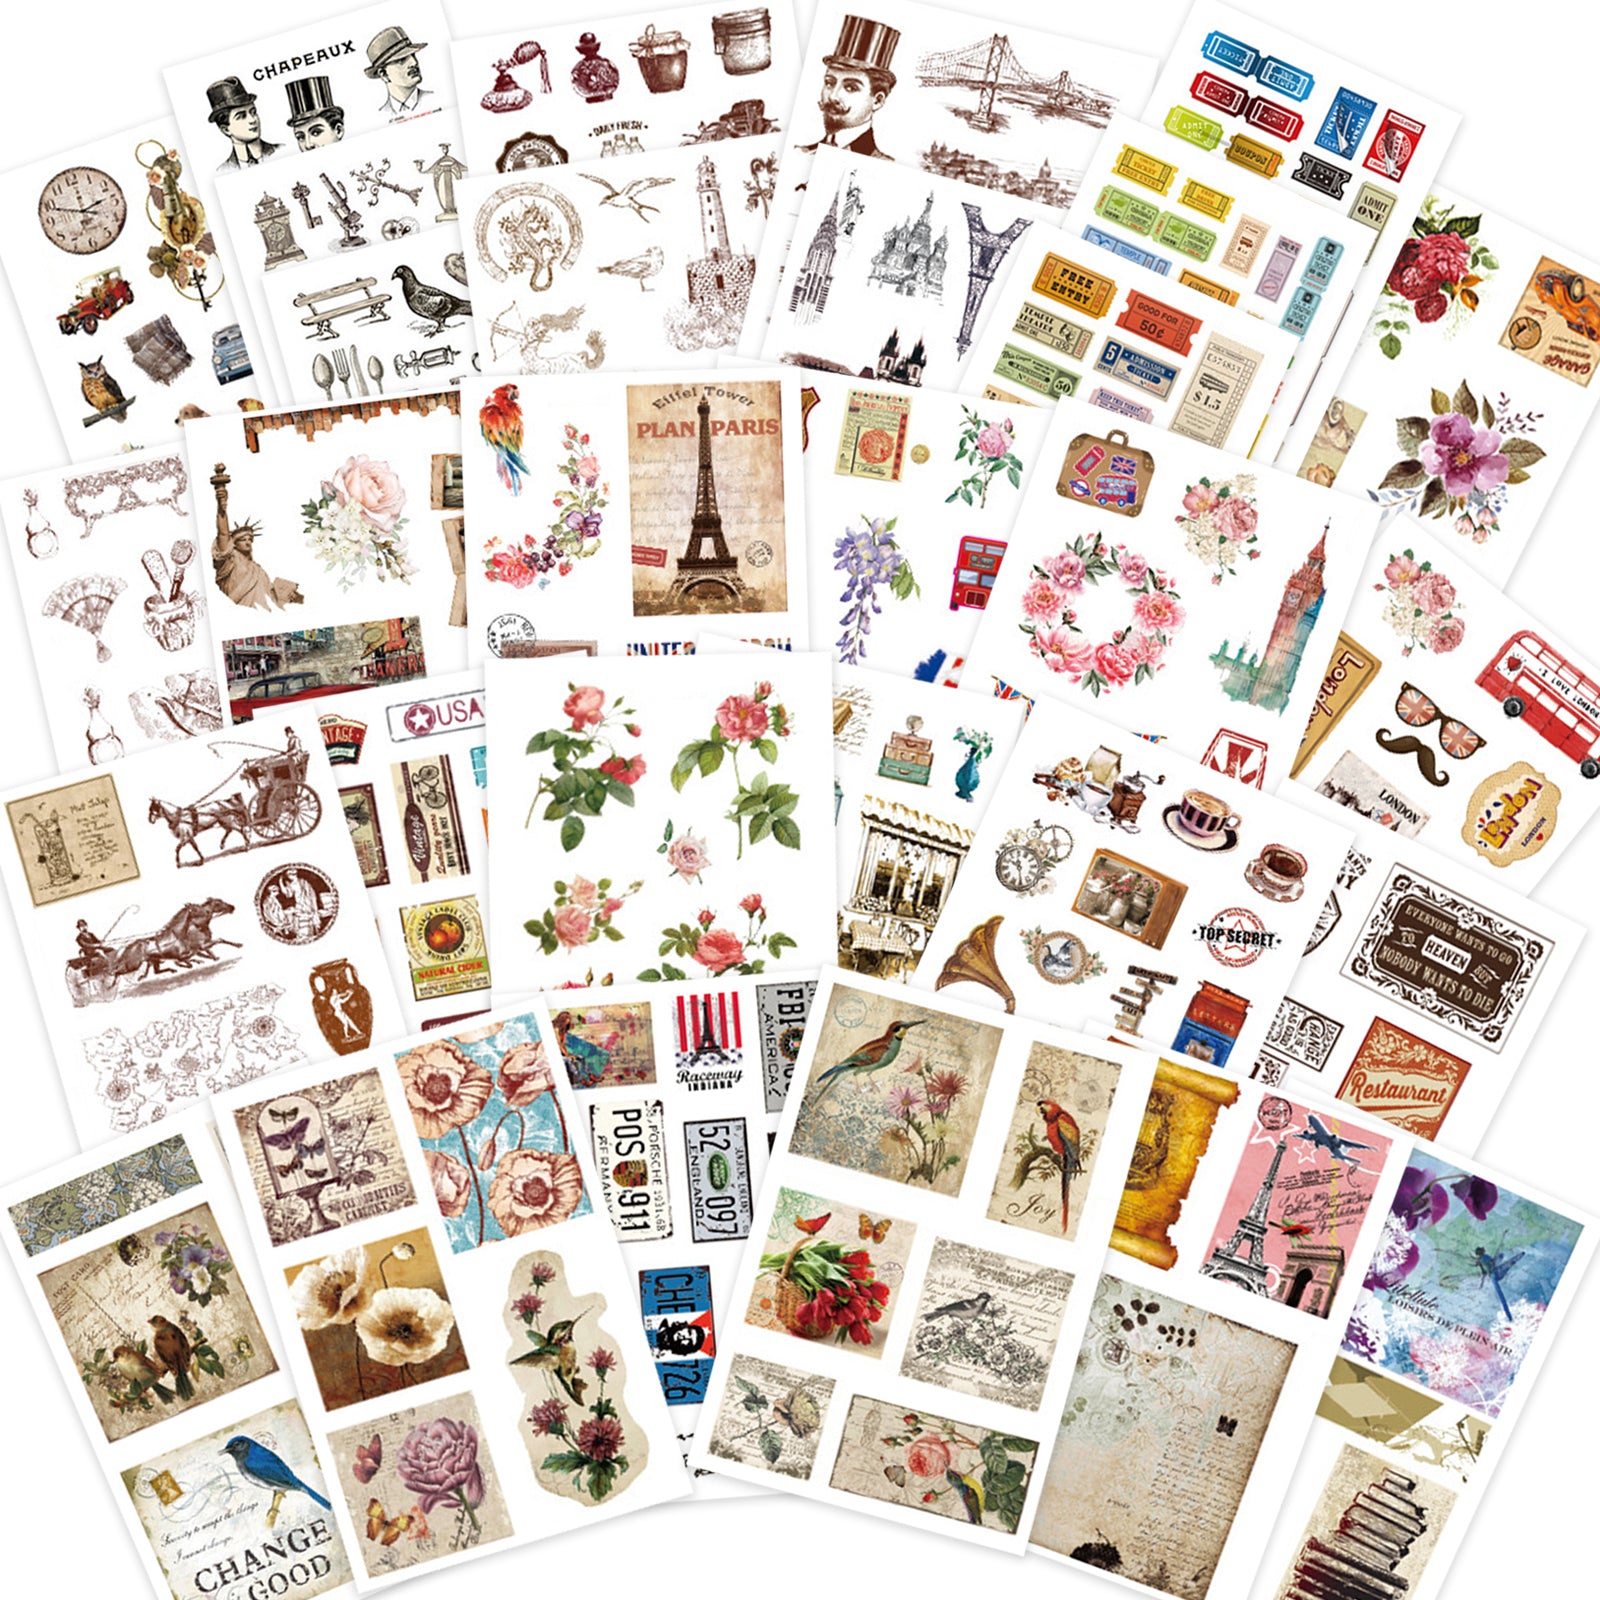 6 Sheets of Journal Stickers. Journaling Stickers, Scrapbook Supplies,  Paper Stickers, Stationery, Journaling Supplies 